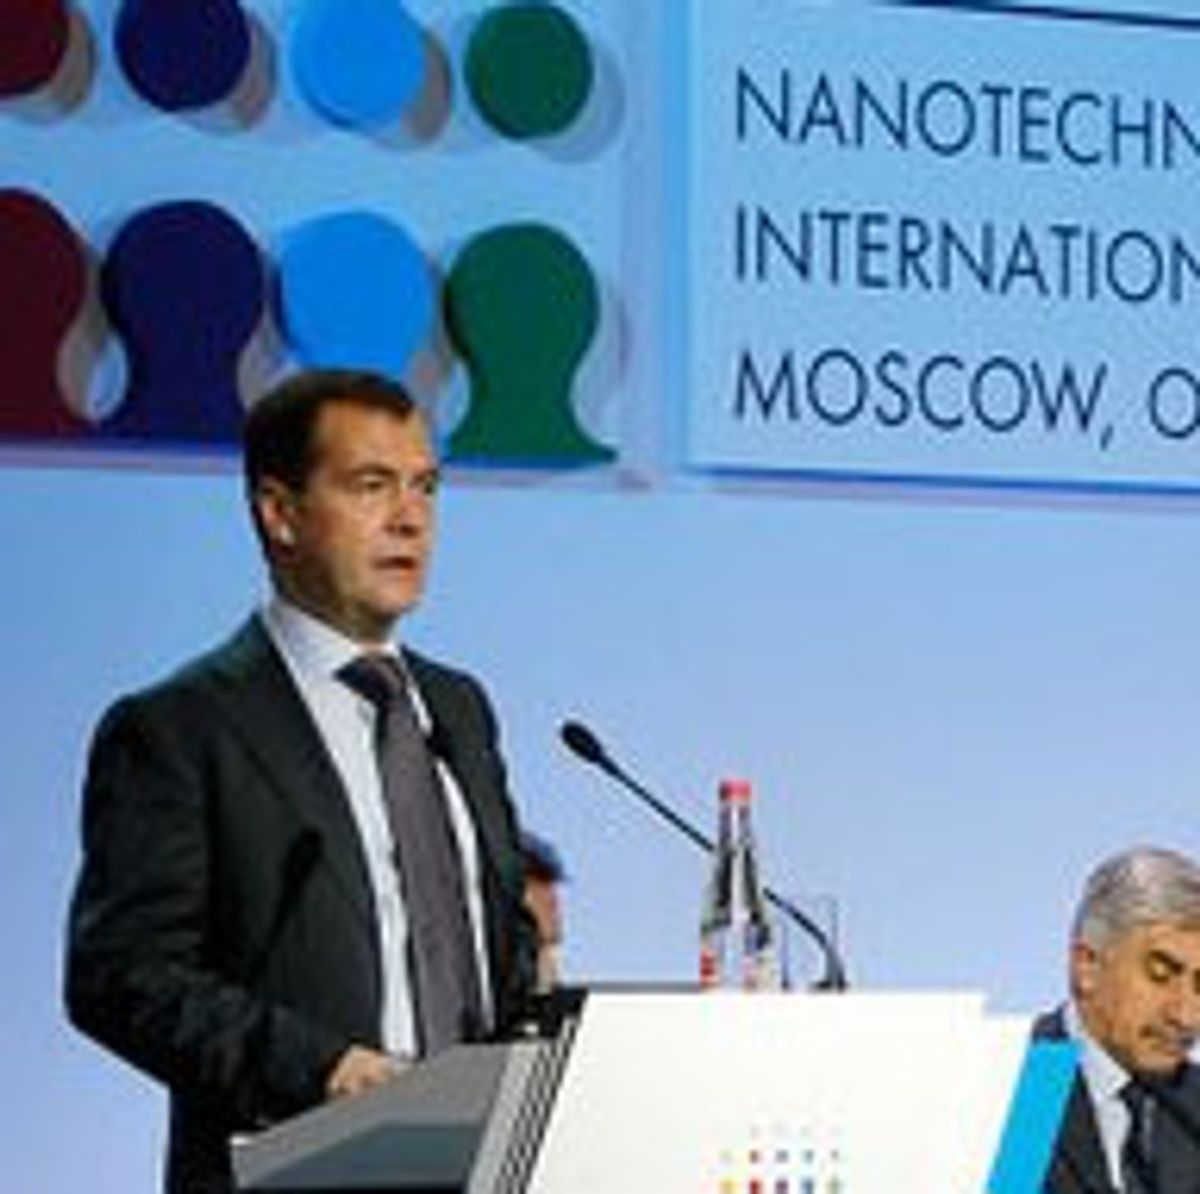 Why is Russia Hot on Molecular Nanotech and the US Not?